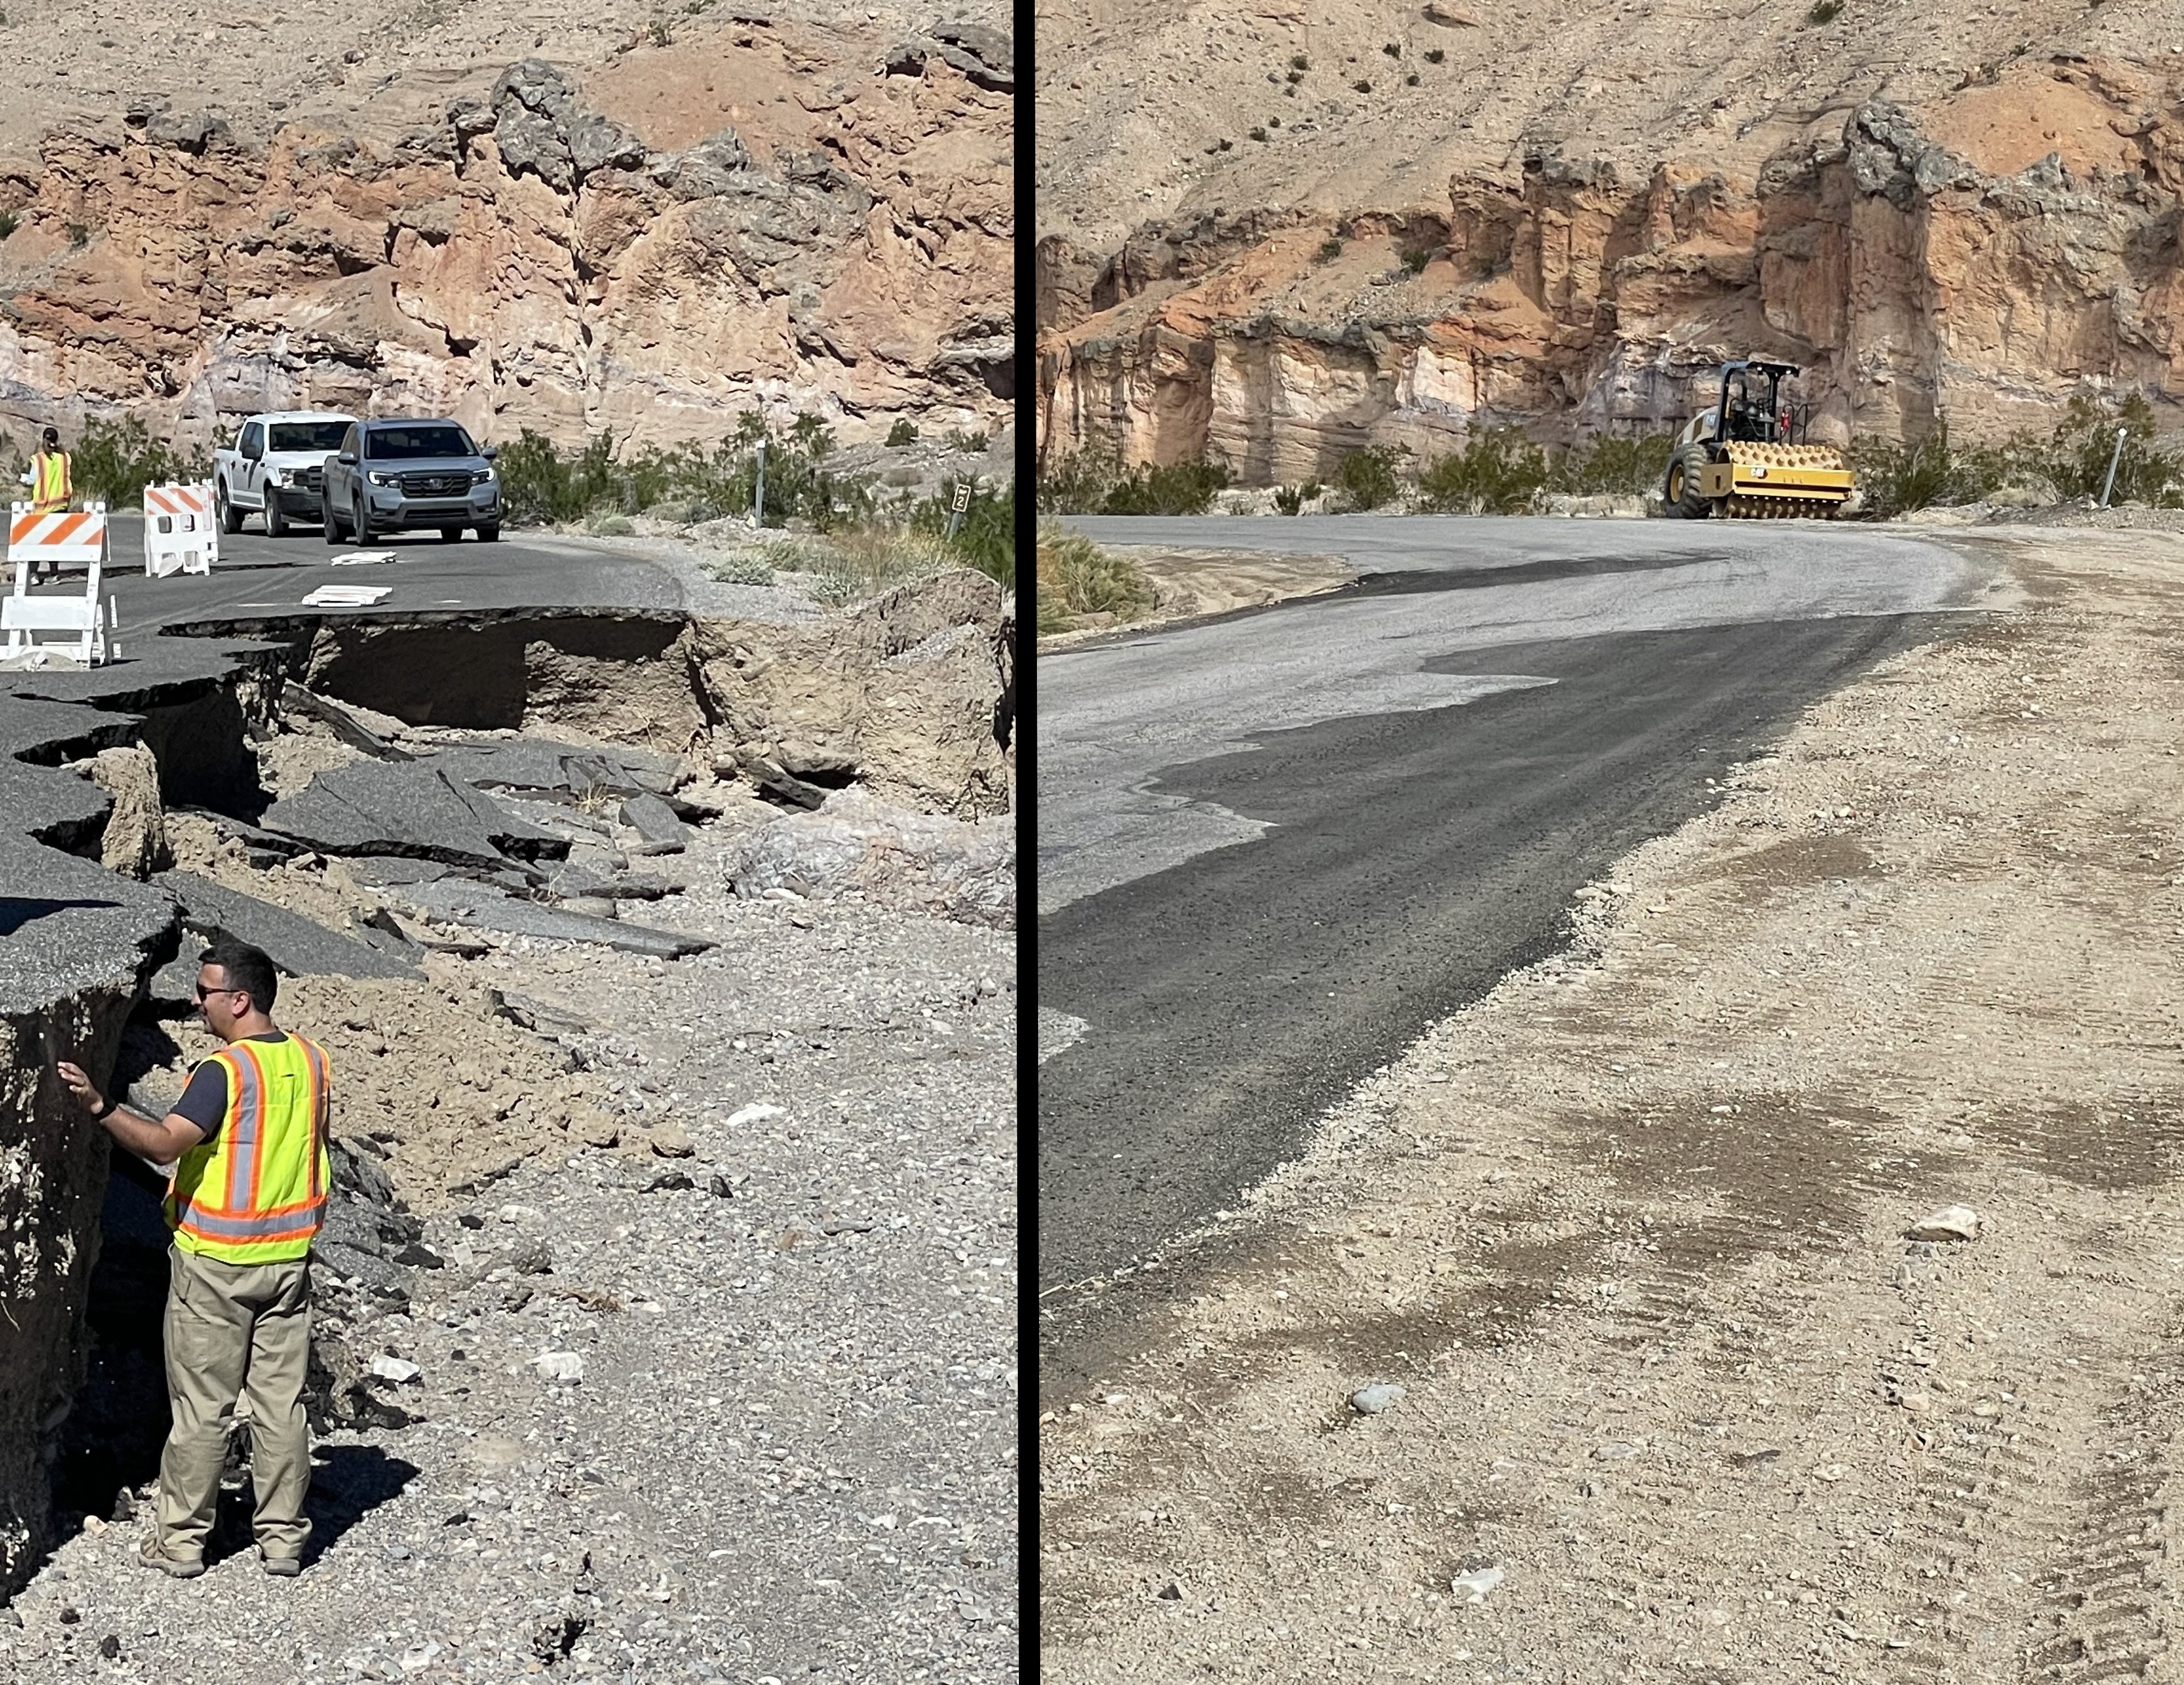 Two images of the same location on different dates separated by a black vertical line. On the left a person in reflective safety vest stands below and next to a damaged road. On the right, the same area has a fresh black asphalt patch.